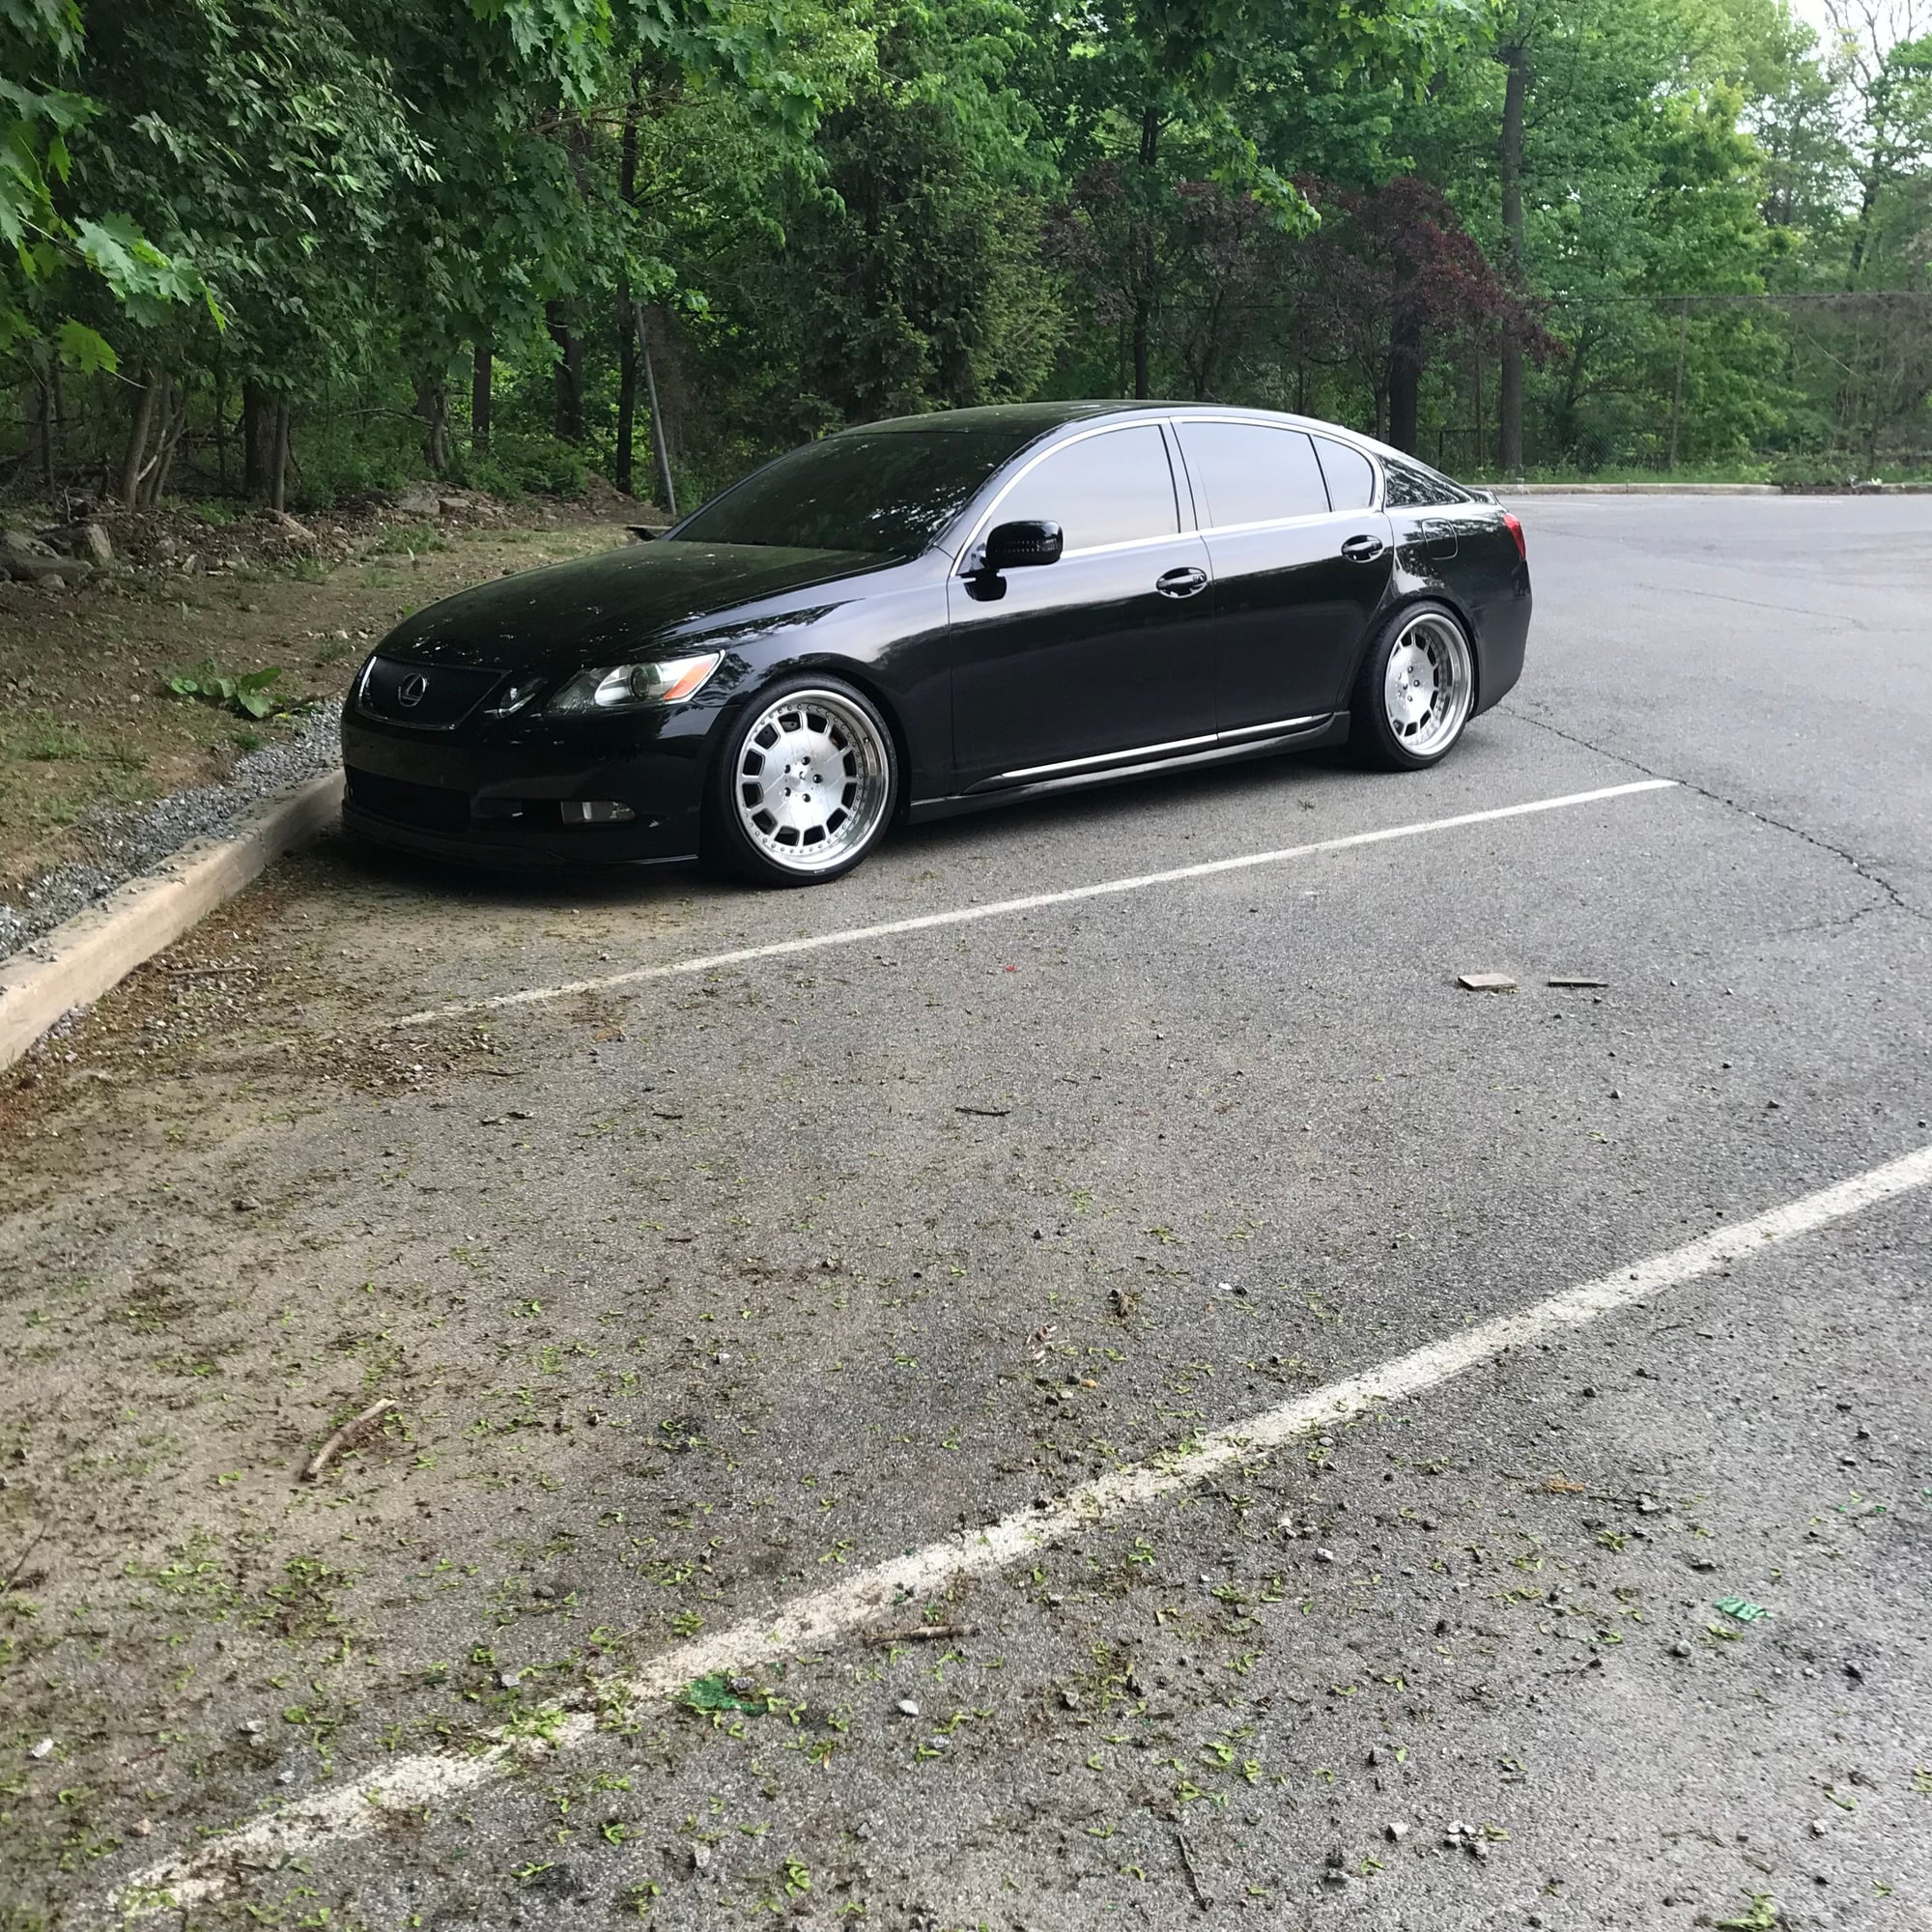 Wheels and Tires/Axles - WTB GS Wheels NYC - Used - 2006 Lexus GS430 - White Plains, NY 10604, United States